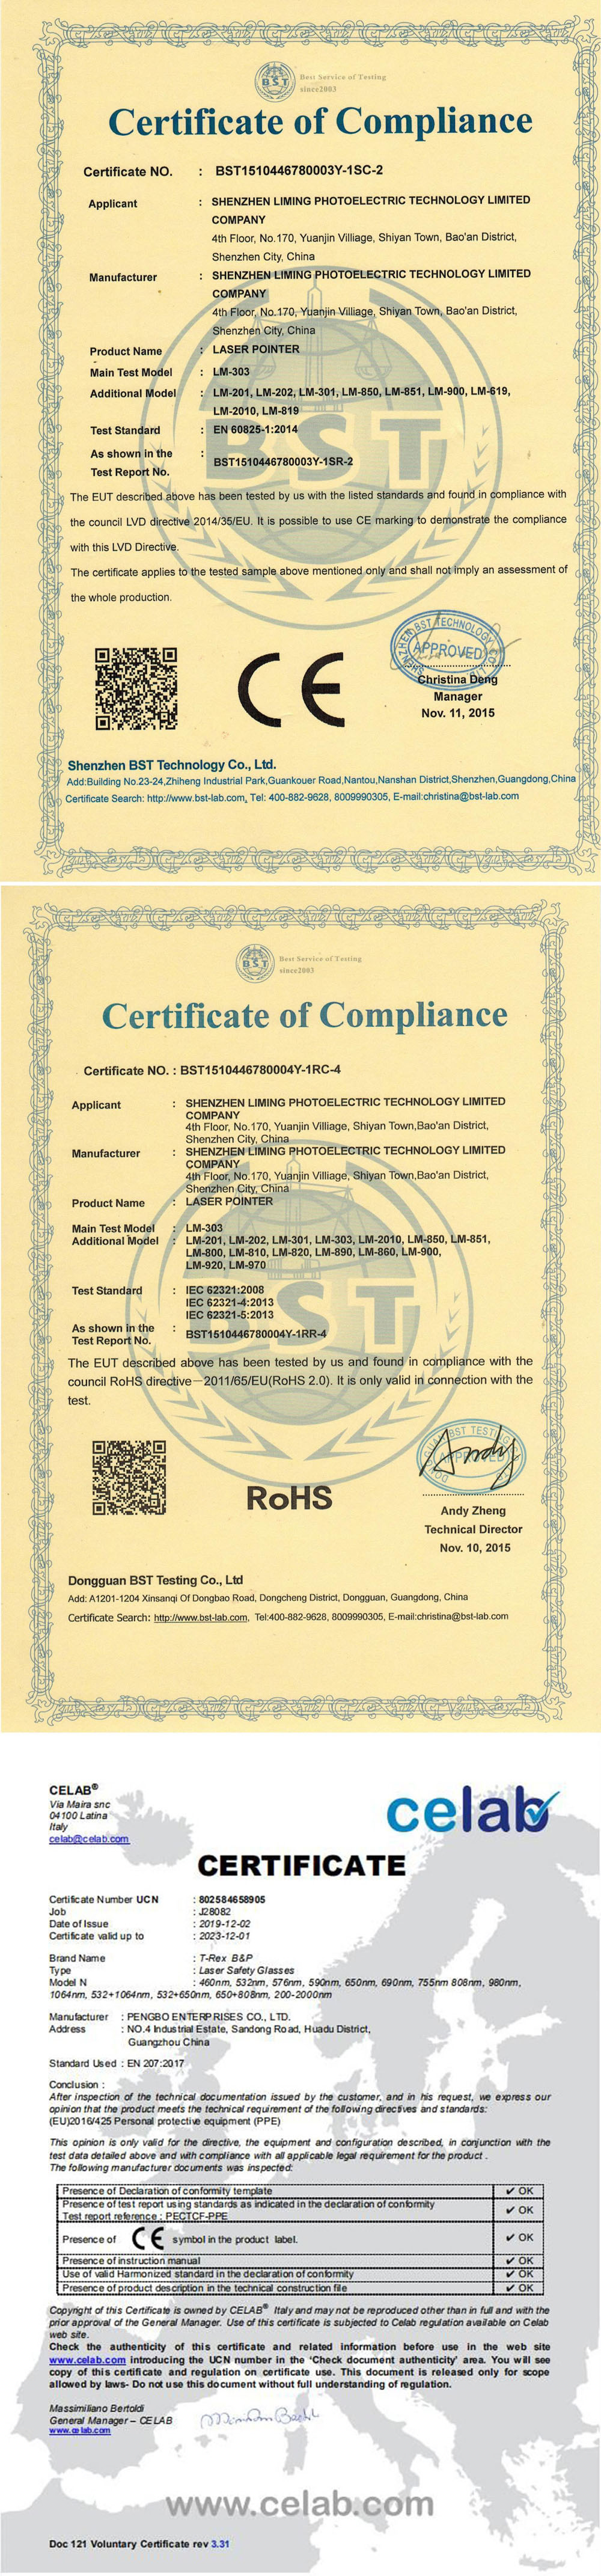 CE/ROHS certifications